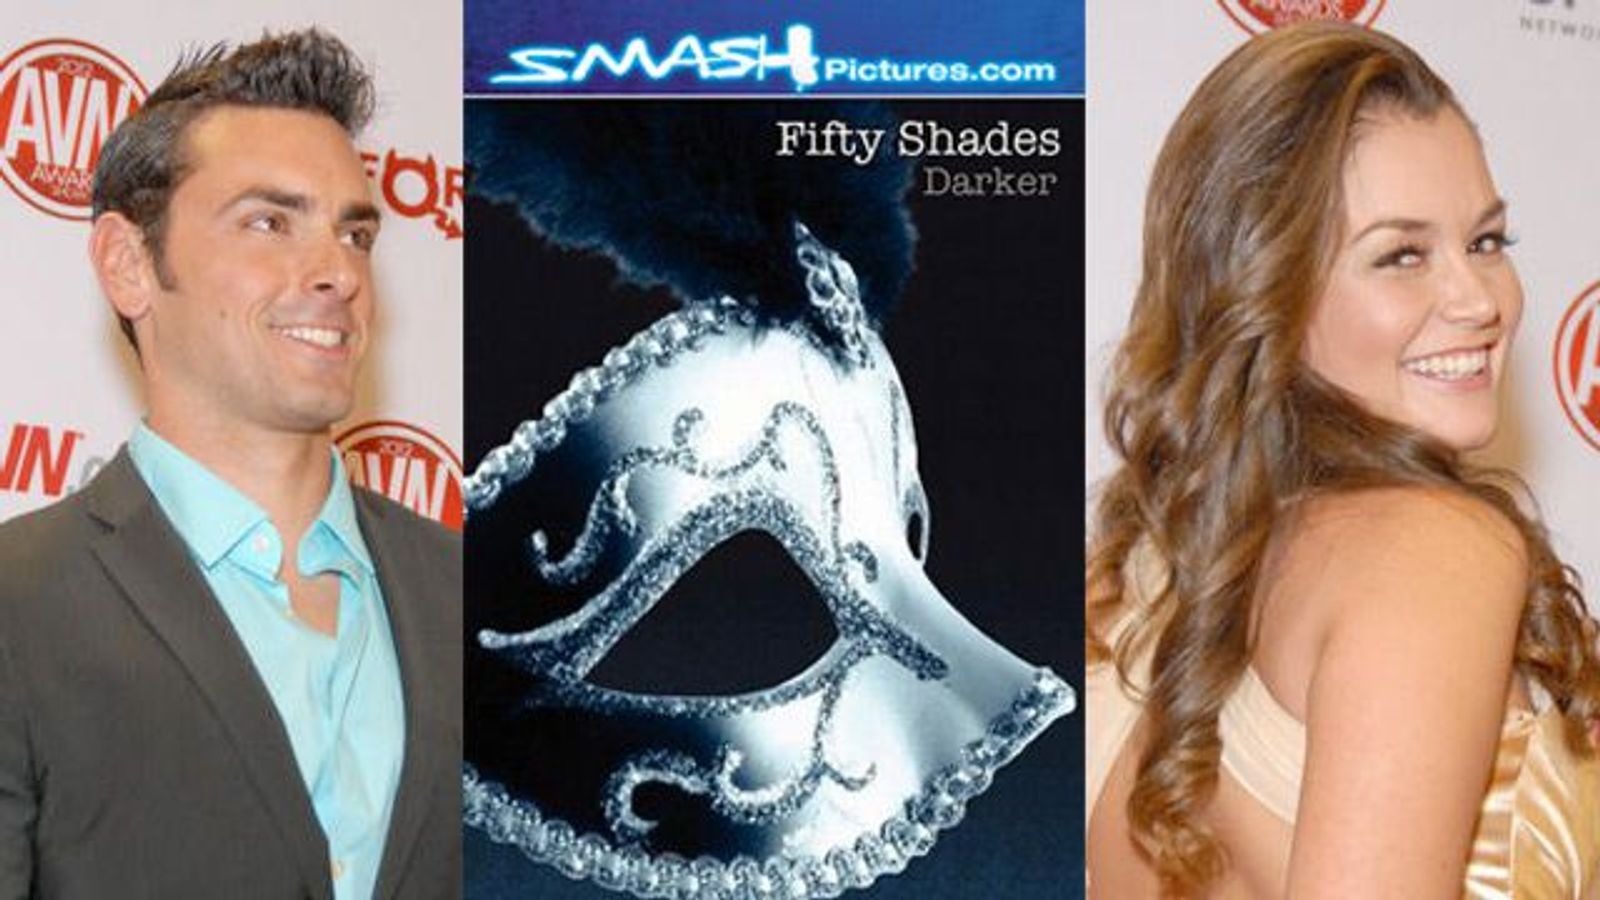 Smash Pictures Runs '50 Shades' Contest for Retailers